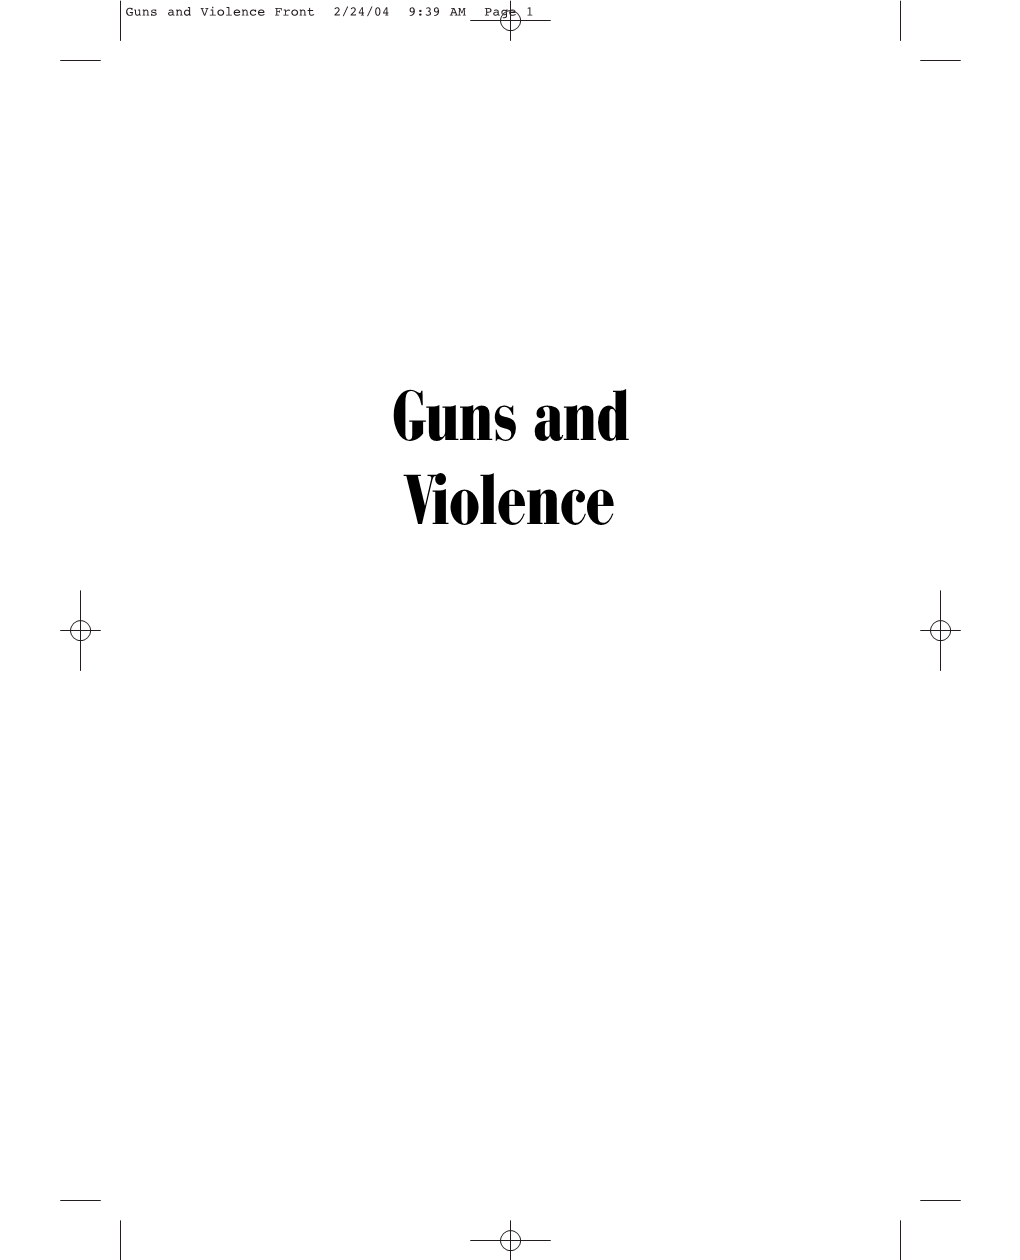 Guns and Violence Front 2/24/04 9:39 AM Page 1